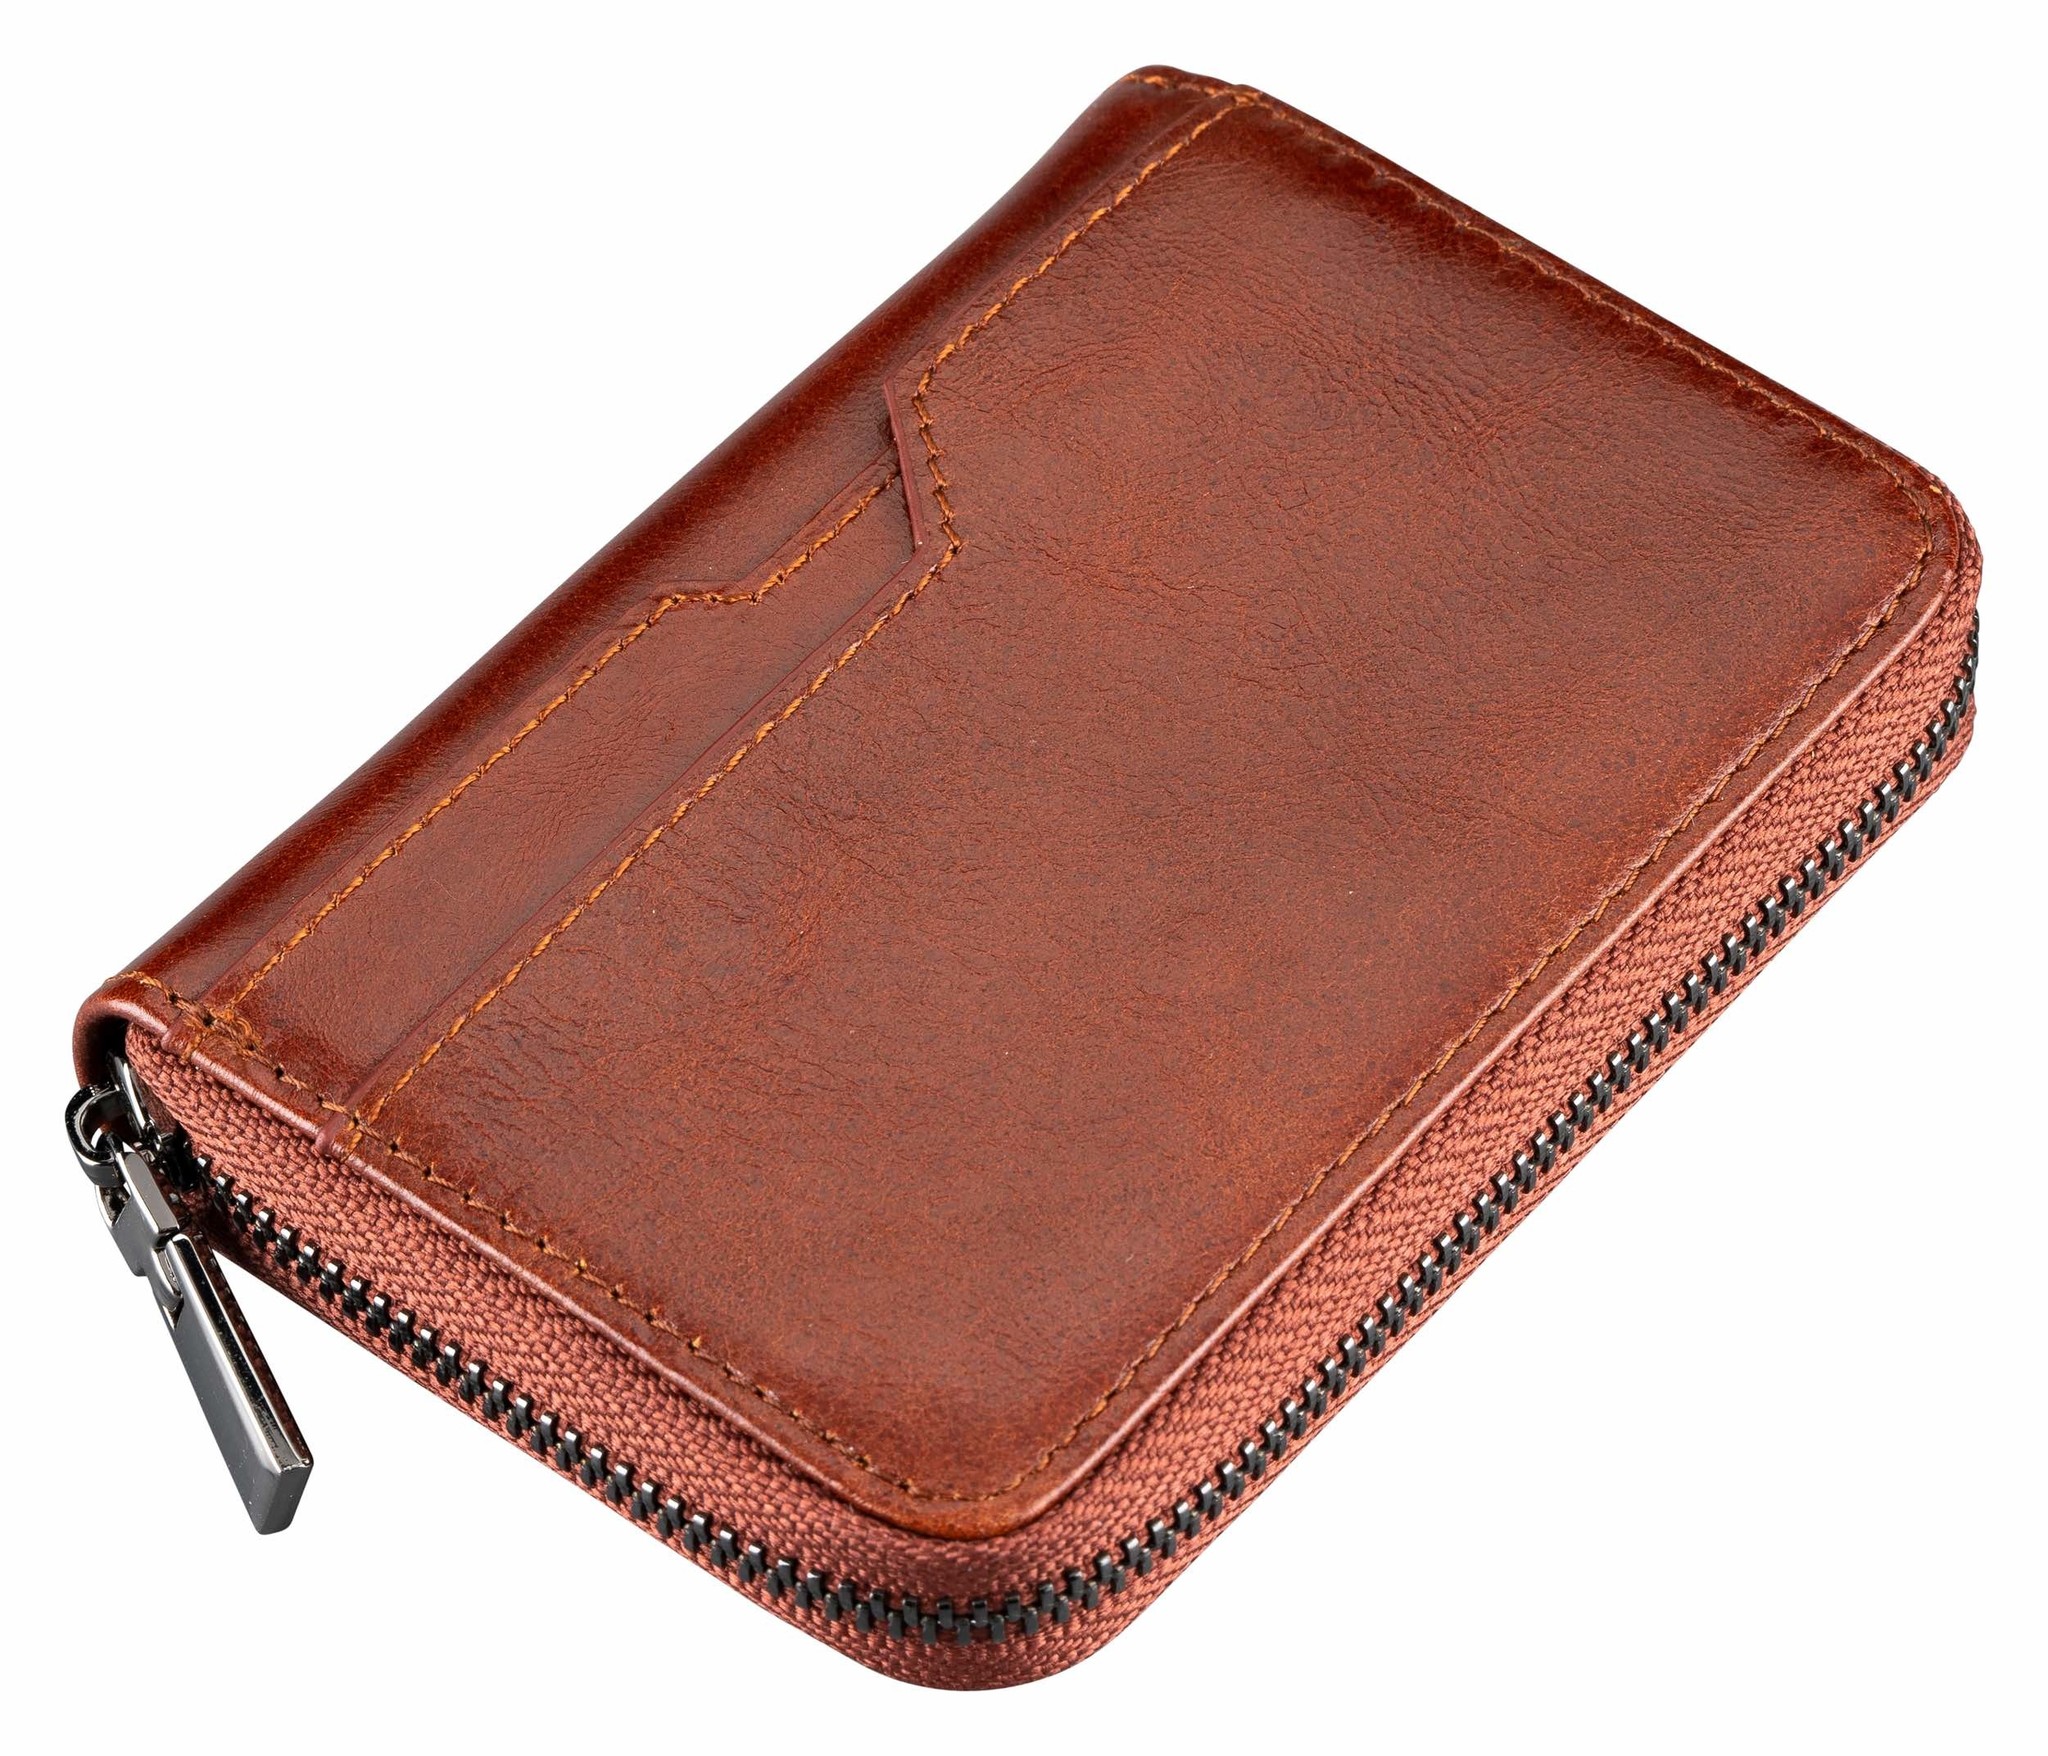 Minimalist Wallet for Men, Leather, RFID Blocking, Card Holder and Money Clip -Brown-1